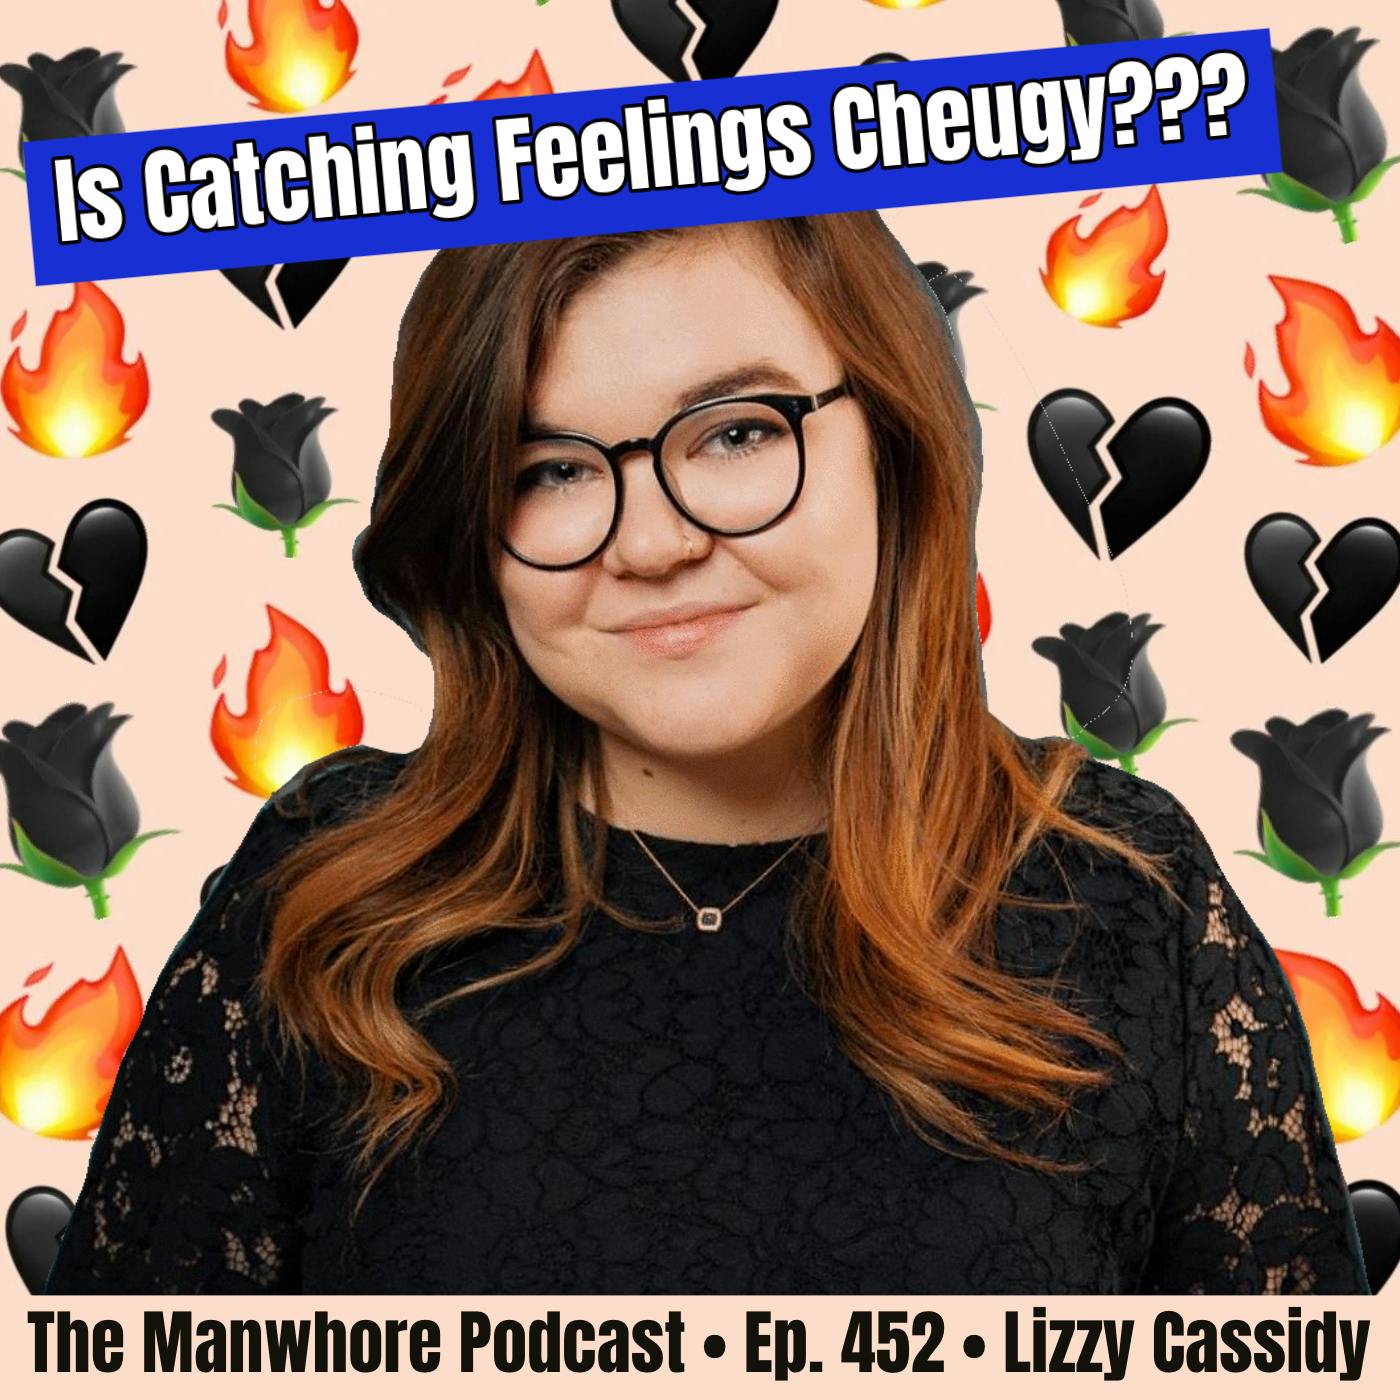 The Manwhore Podcast: A Sex-Positive Quest - Ep. 452: Is Catching Feelings Cheugy? with comedian Lizzy Cassidy